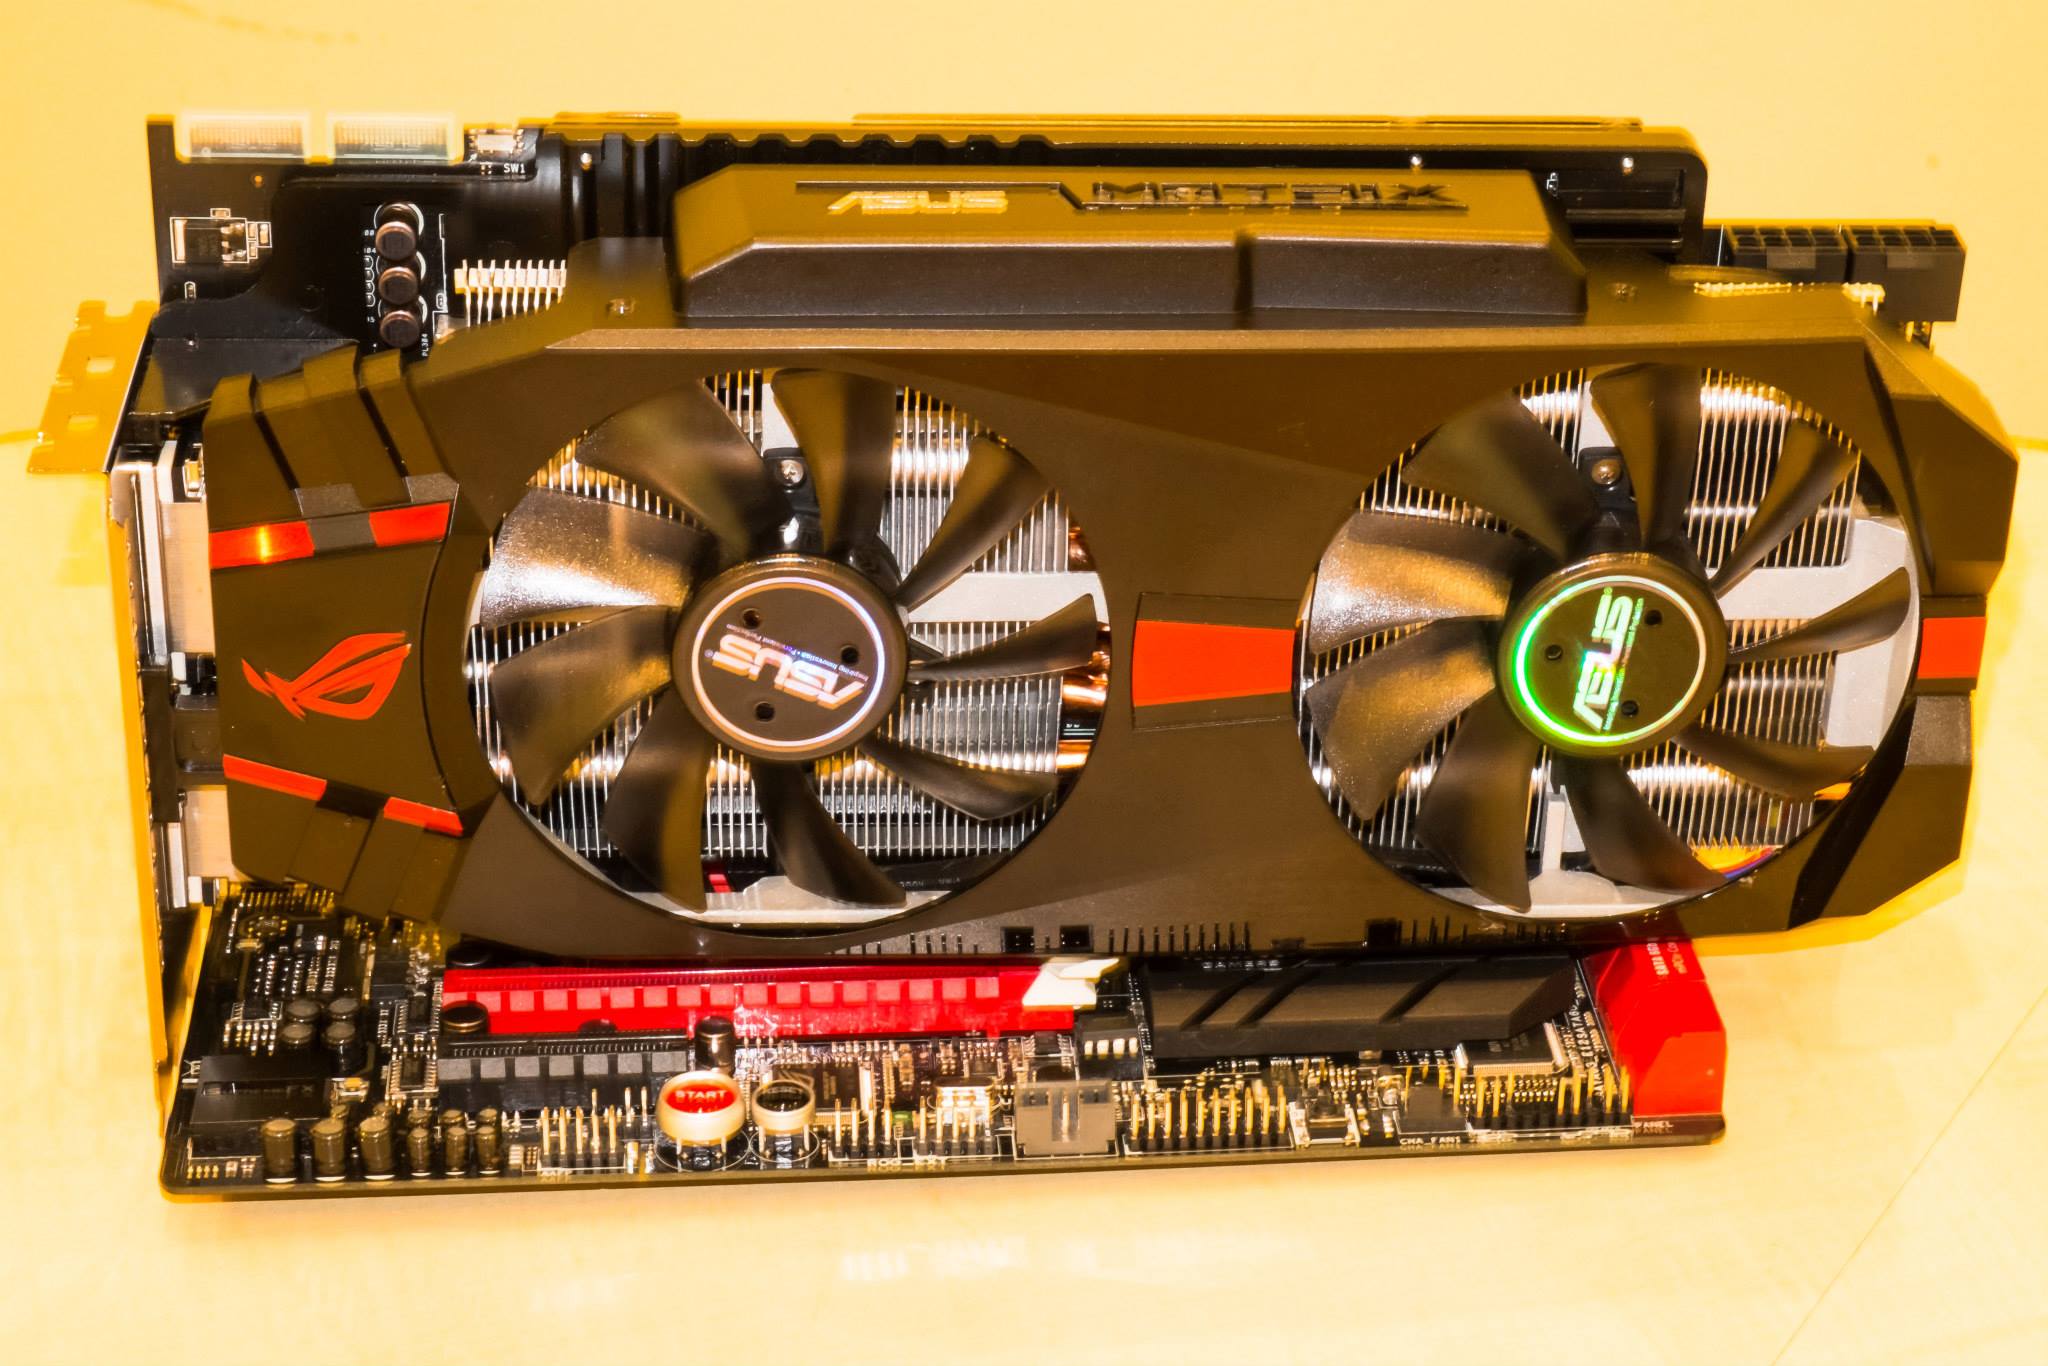 Media asset (photo, screenshot, or image in full size) related to contents posted at 3dfxzone.it | Image Name: news20183-ASUS-ROG-Matrix-R9-280X-Platinum_5.jpg